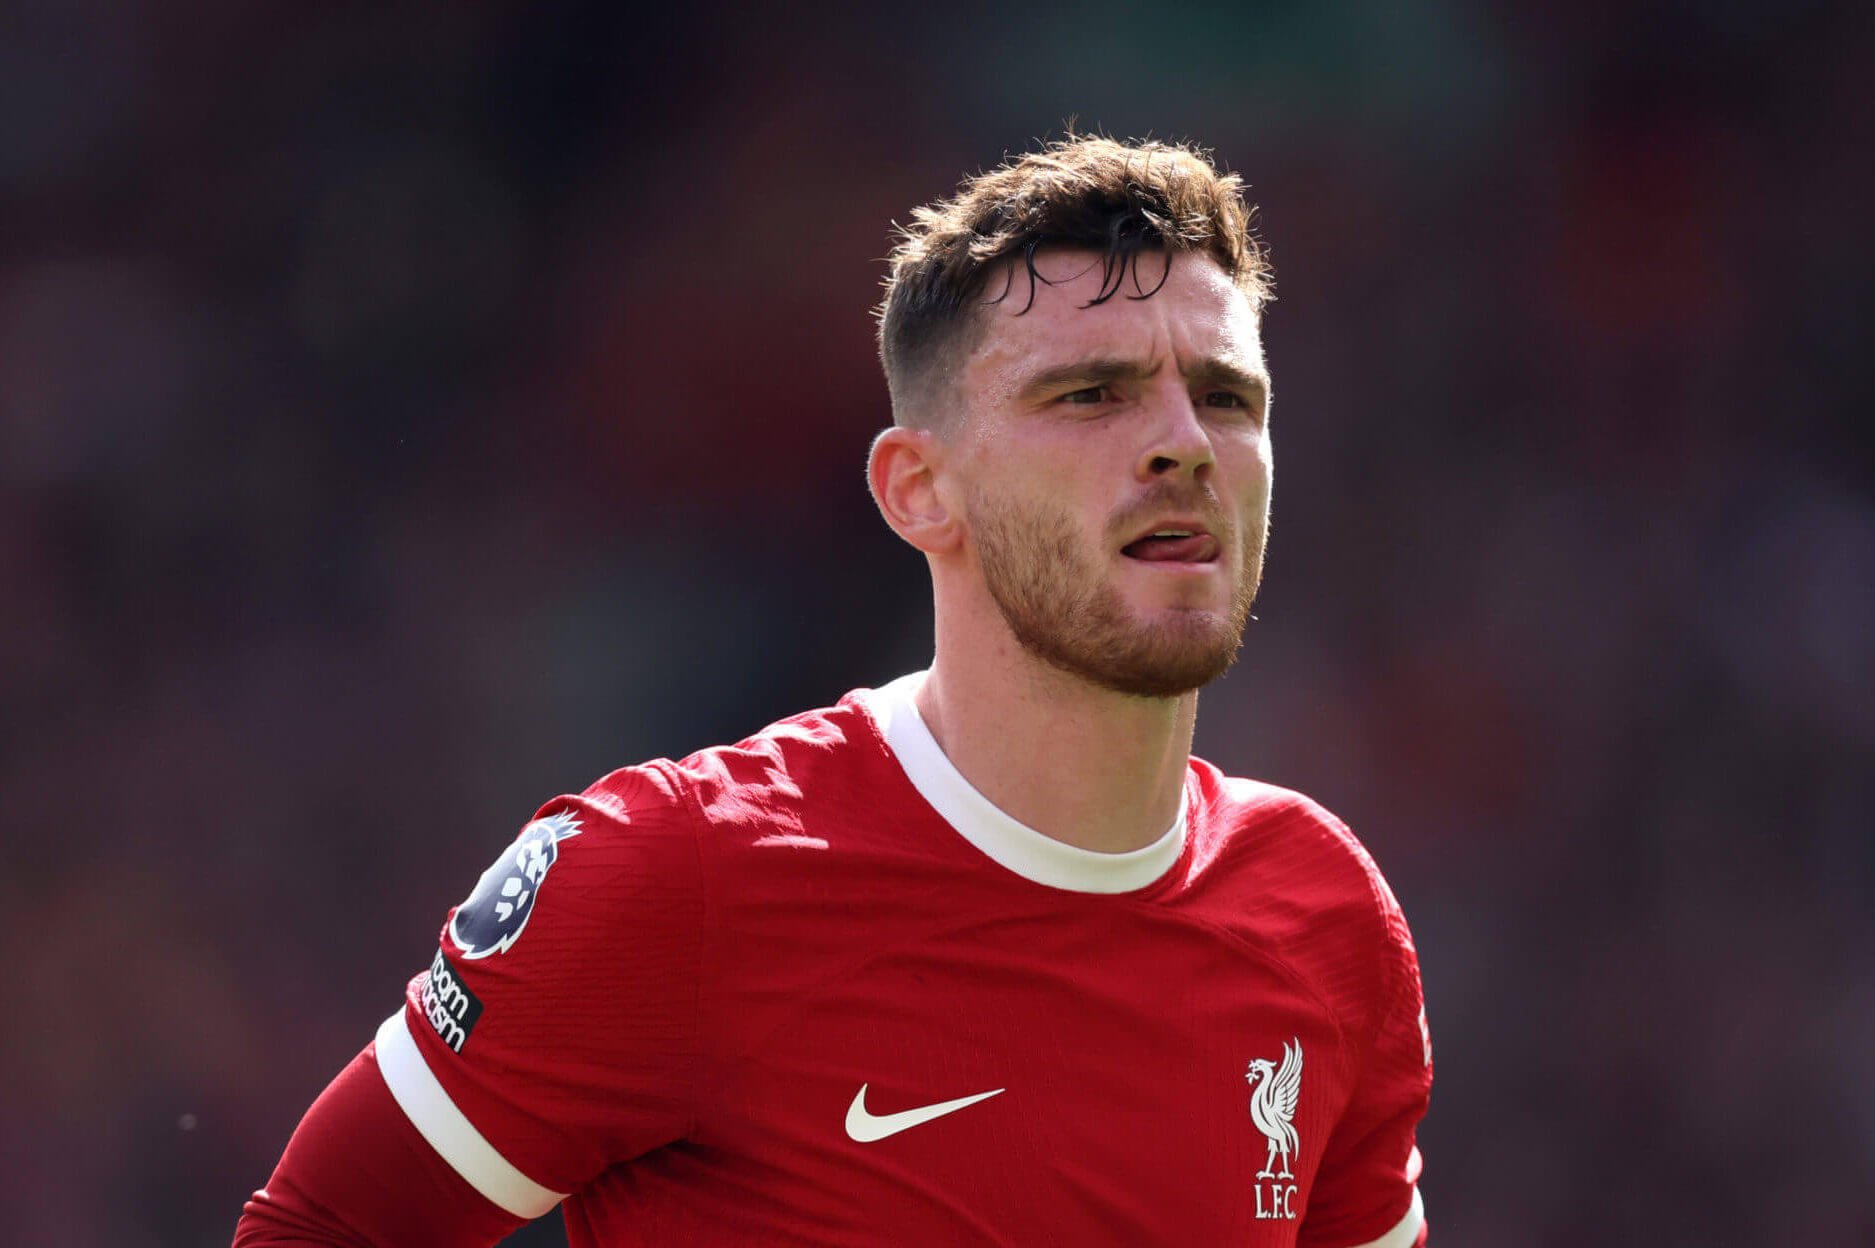 Liverpool defender Andrew Robertson has operation on shoulder injury